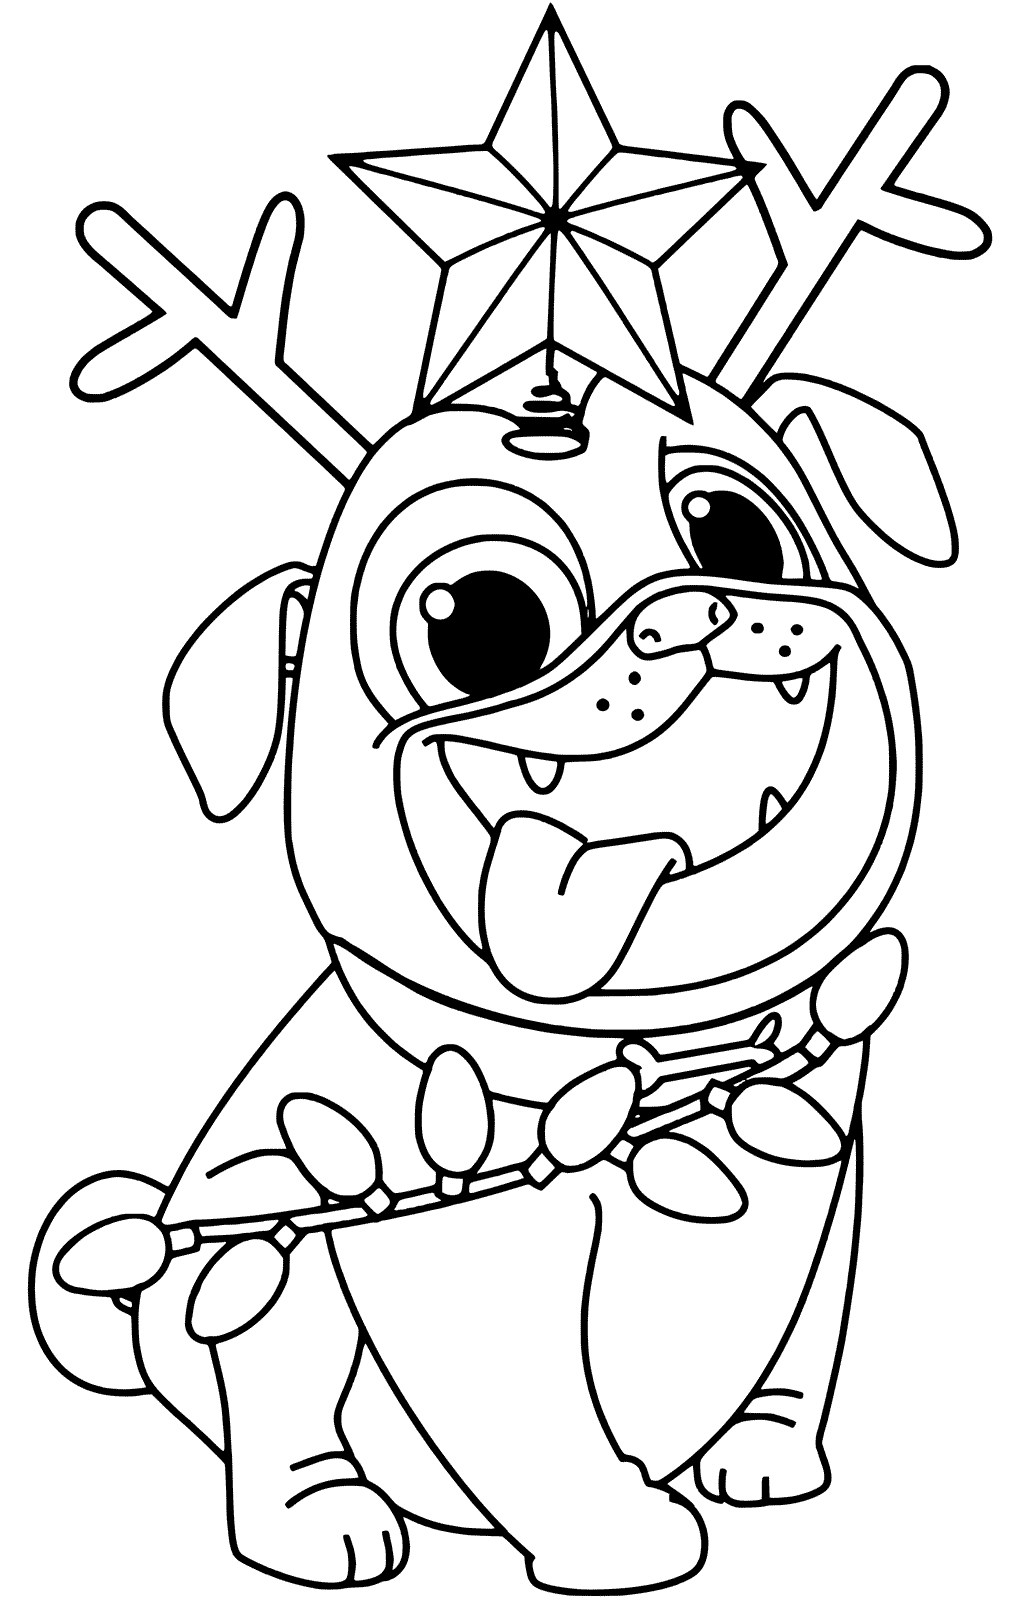 Puppy Dog Pals Christmas Coloring Pages